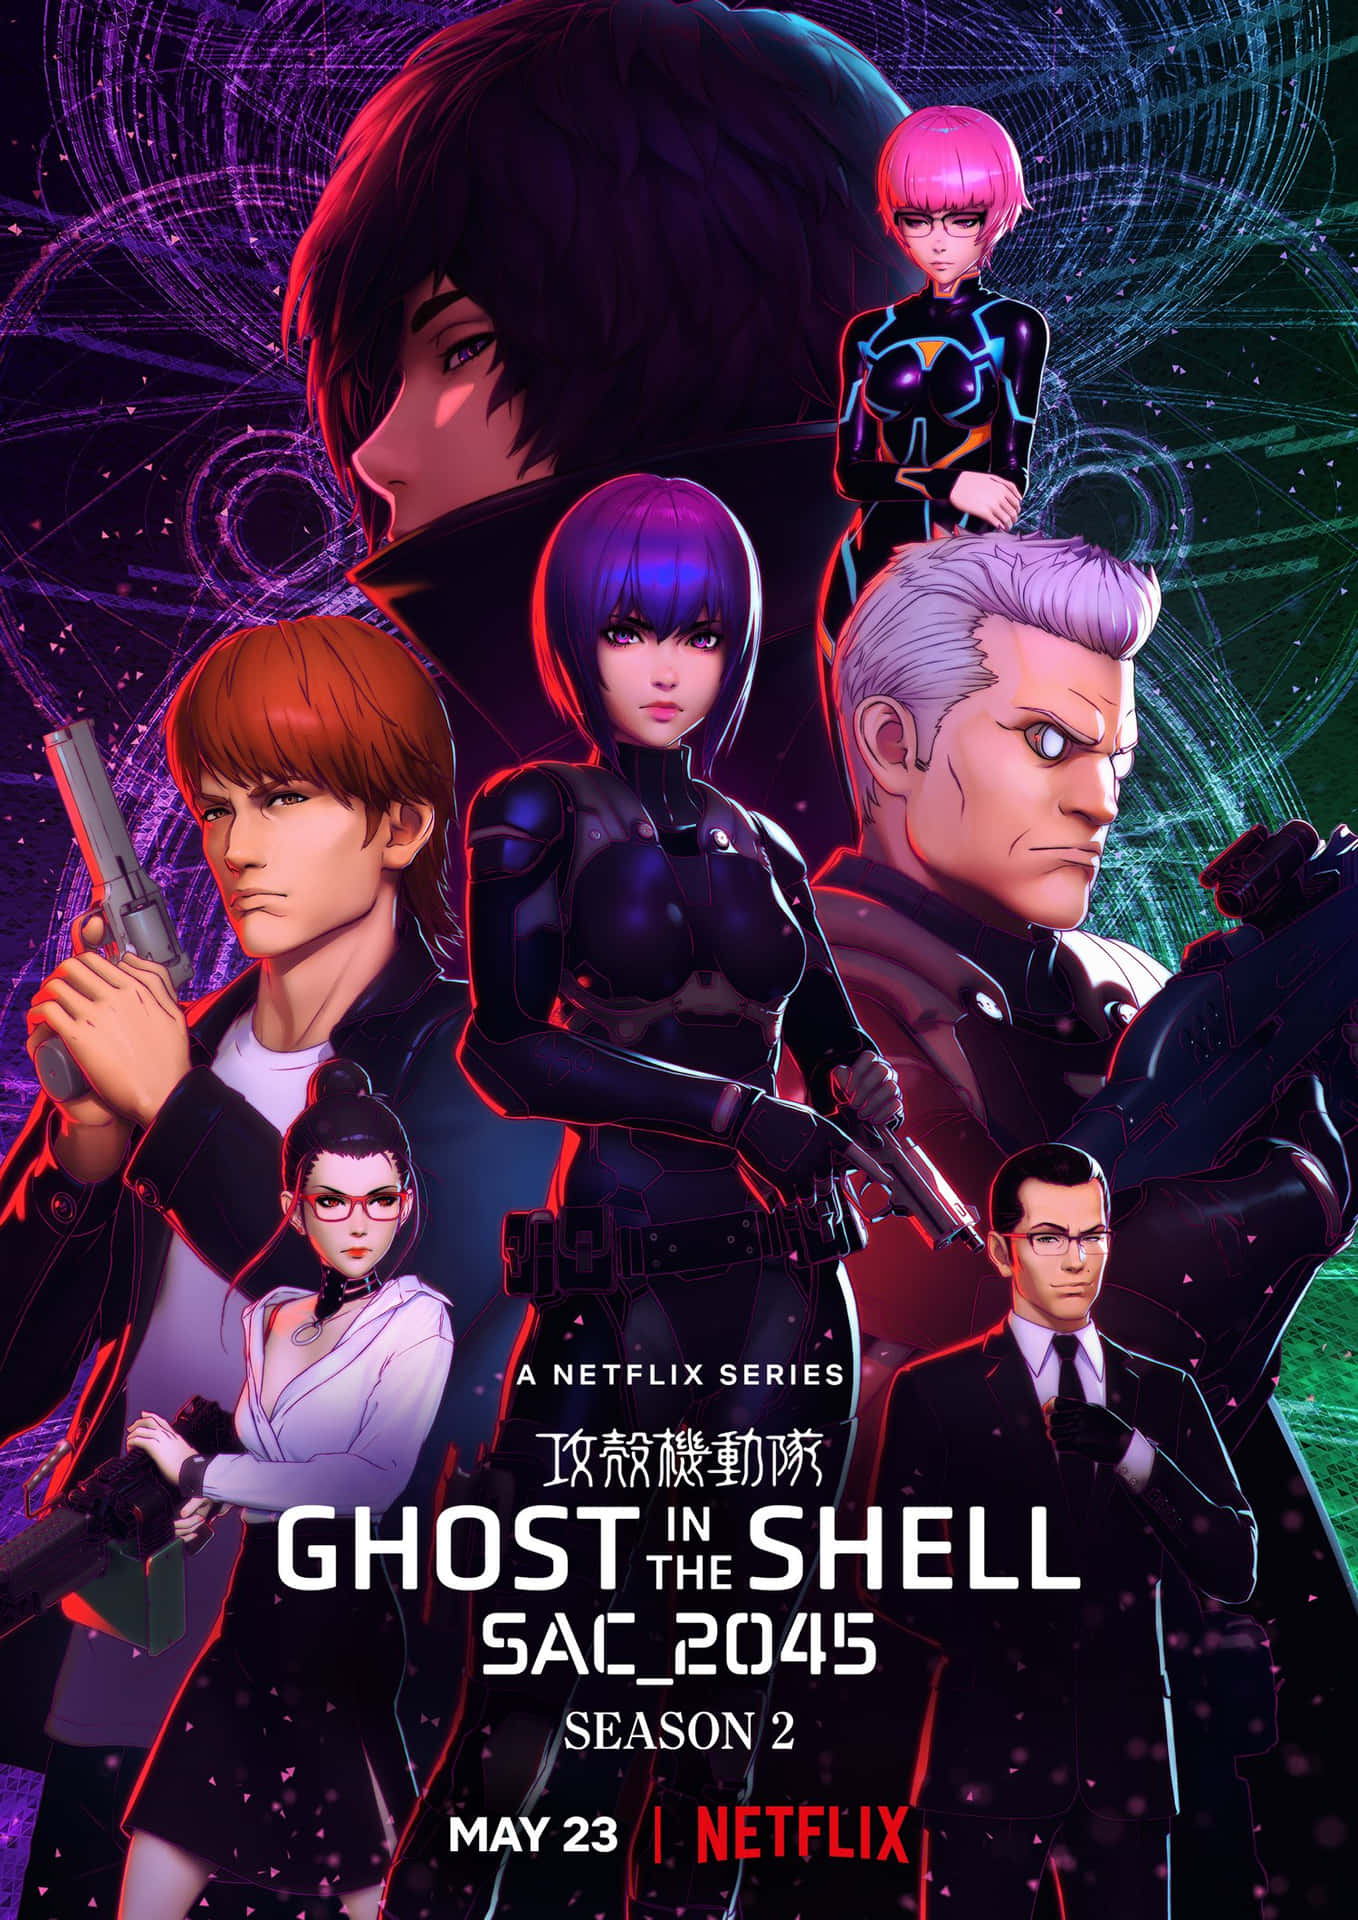 "Enhancing Cybernetic Abilities to the Next Level - Ghost in the Shell"